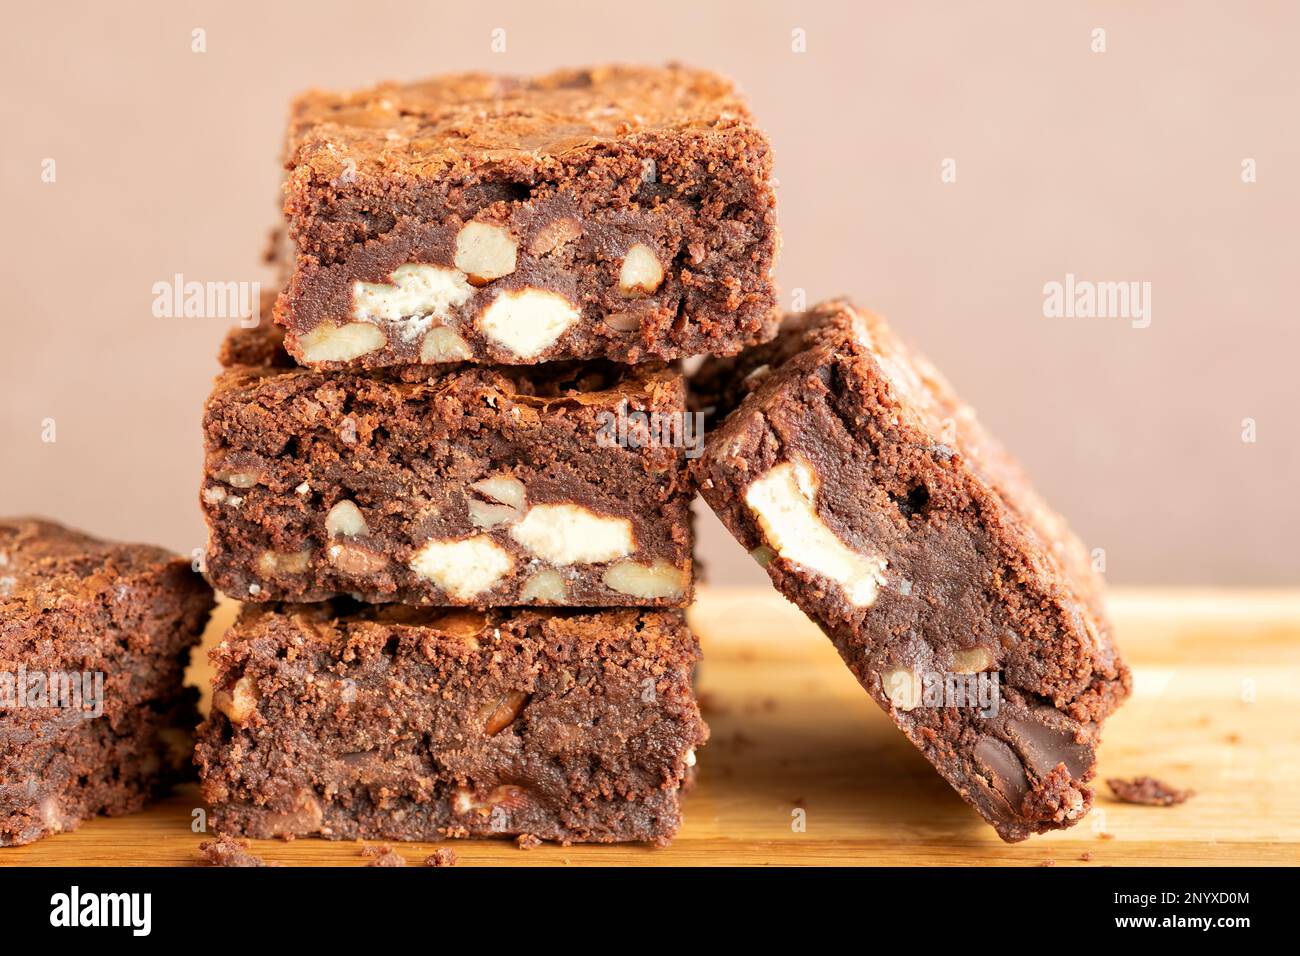 A batch of freshly home baked triple chocolate brownies arranged on a wooden platter. The brownies are still warm and gooey. an indulgent treat Stock Photo